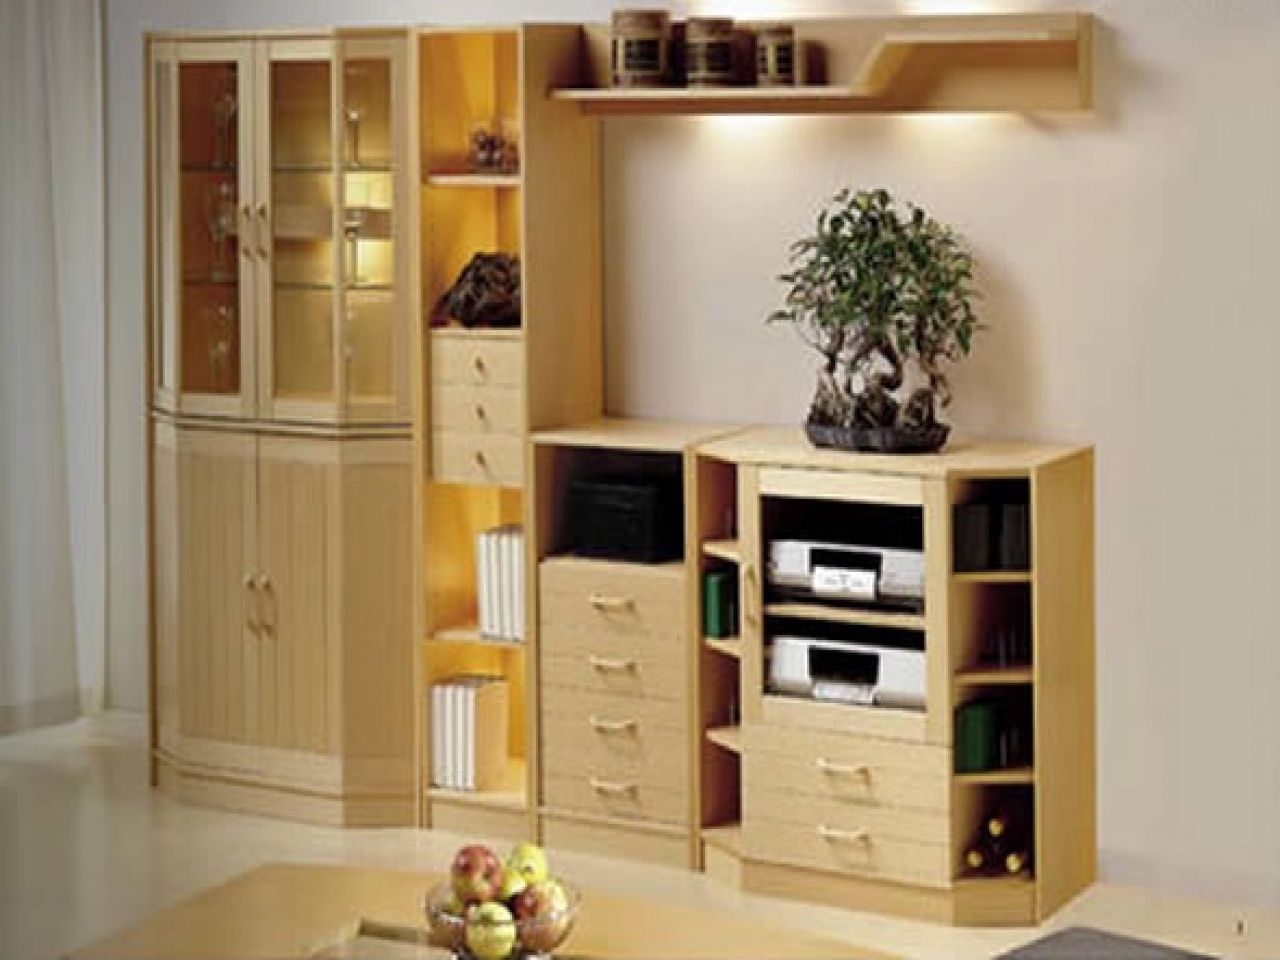 Living Room Storage Systems Home Shelving Systems Home Storage Throughout Home Shelving Systems (View 13 of 15)